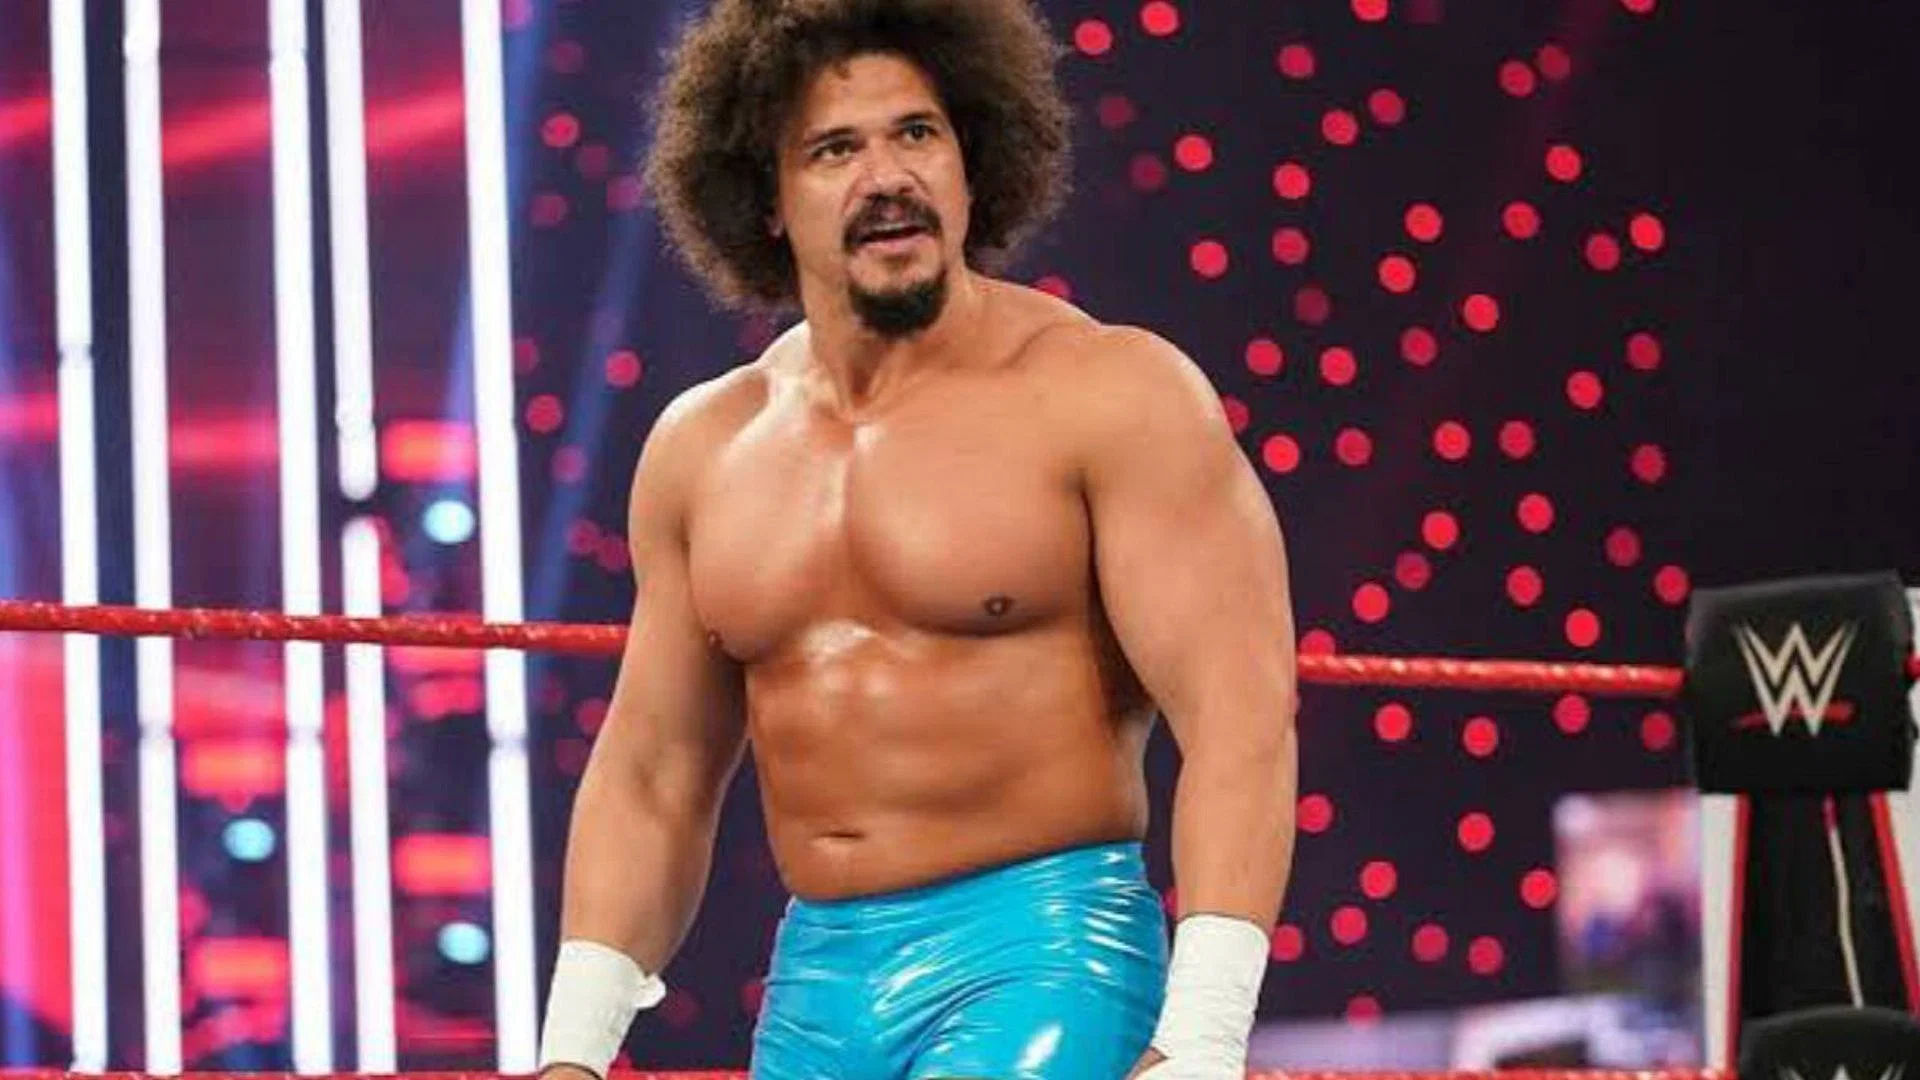 Carlito's Triumphant Return Ending a 13-Year Wait at WWE's Oakland Showstopper